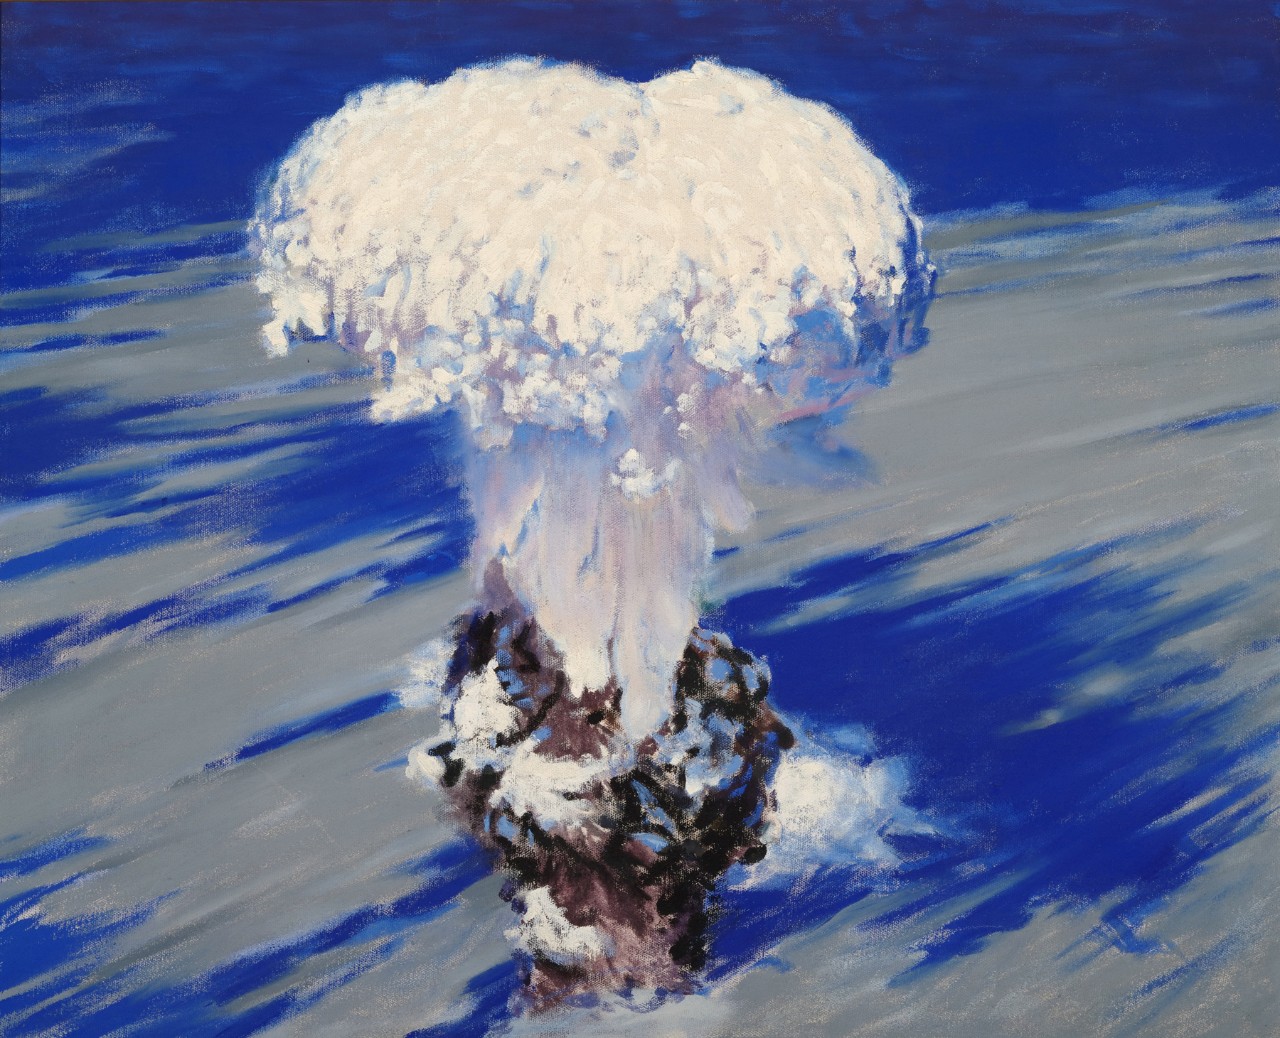 An atom bomb mushroom cloud seen from a top down perspective